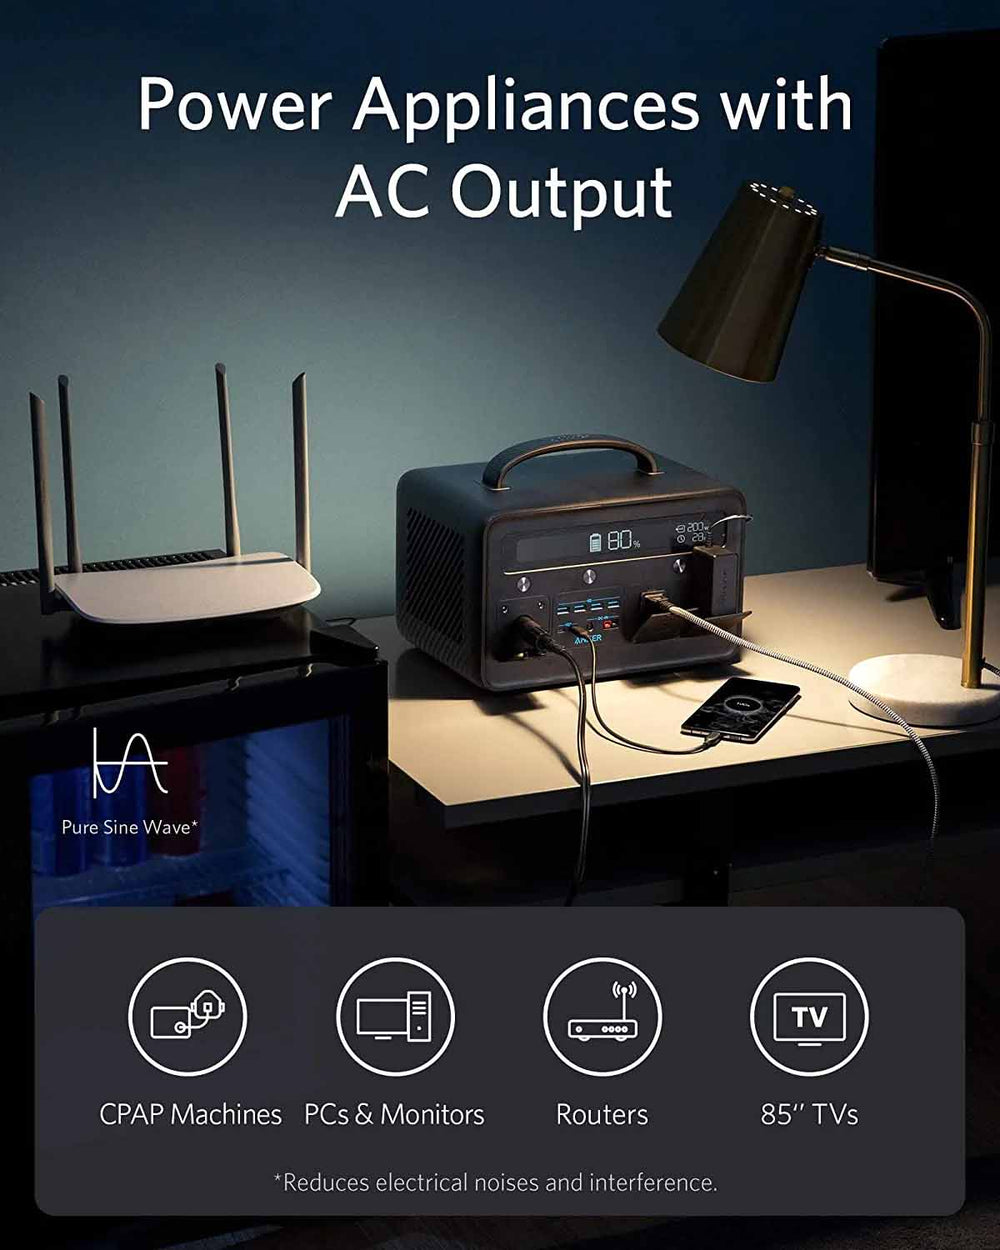 Power Appliances With AC Output